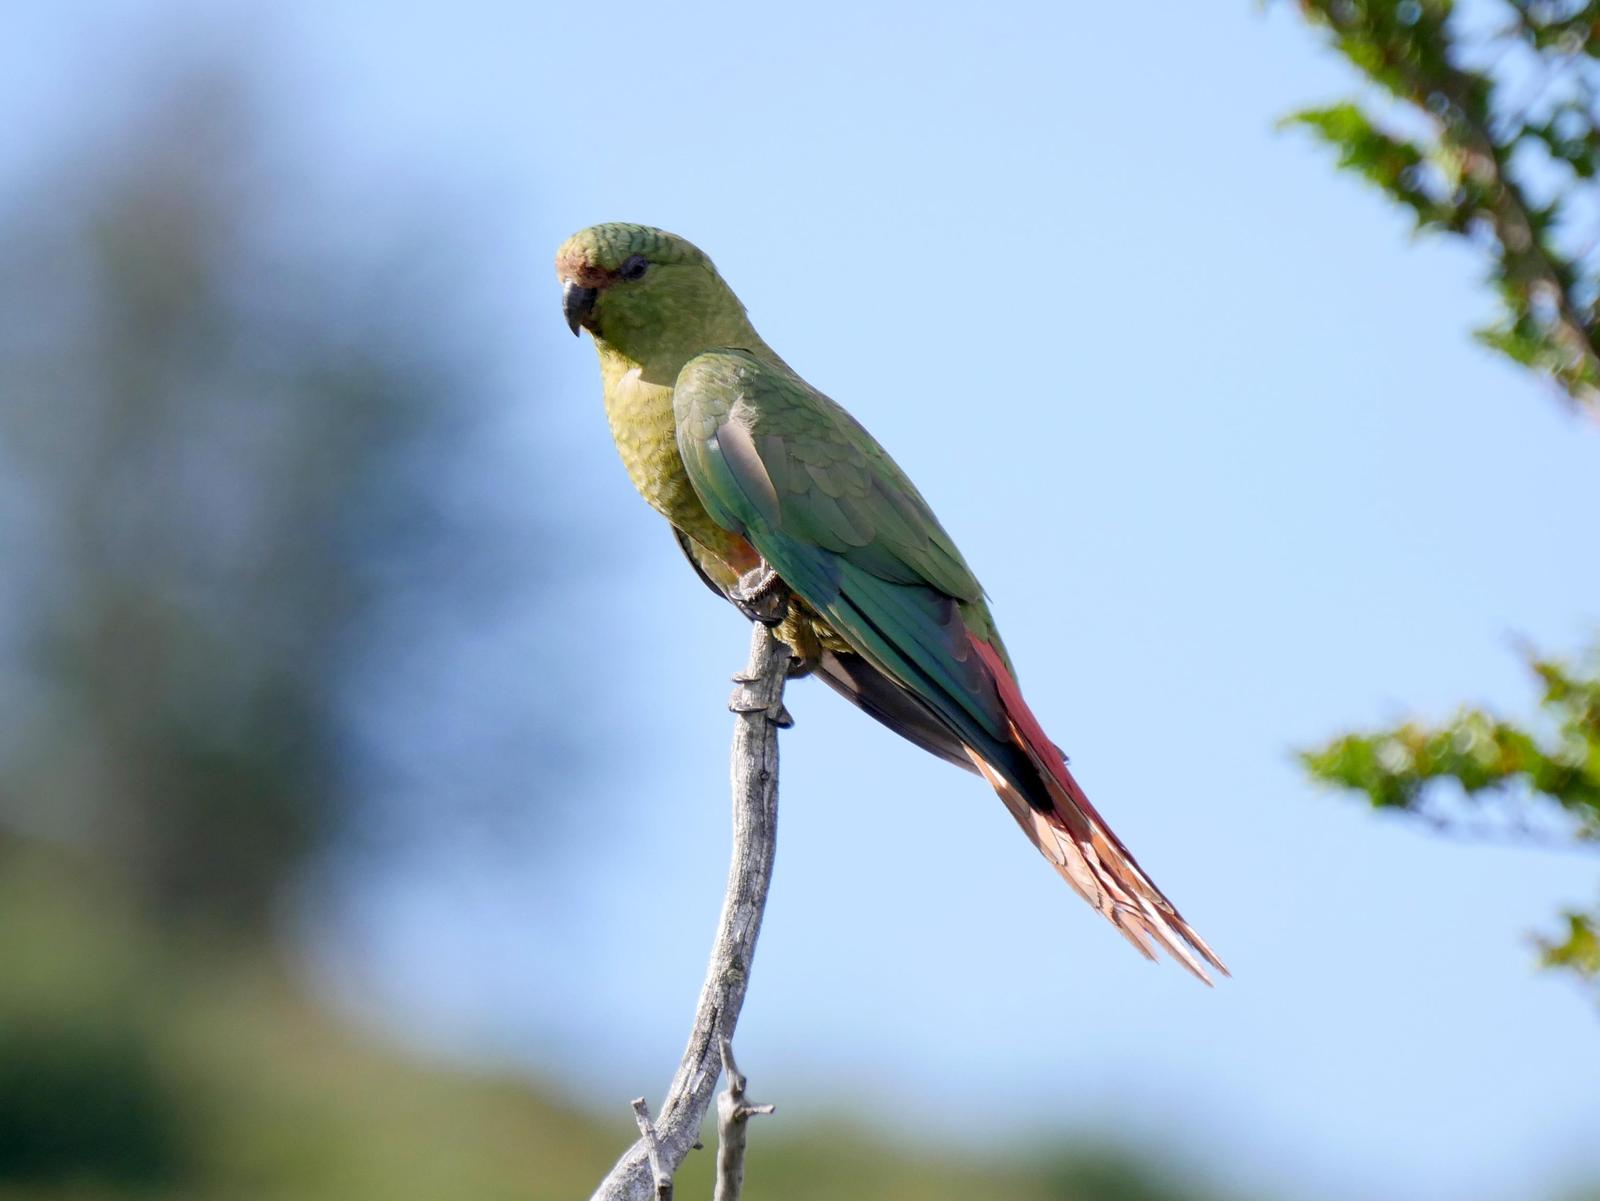 Austral Parakeet Photo by Peter Lowe